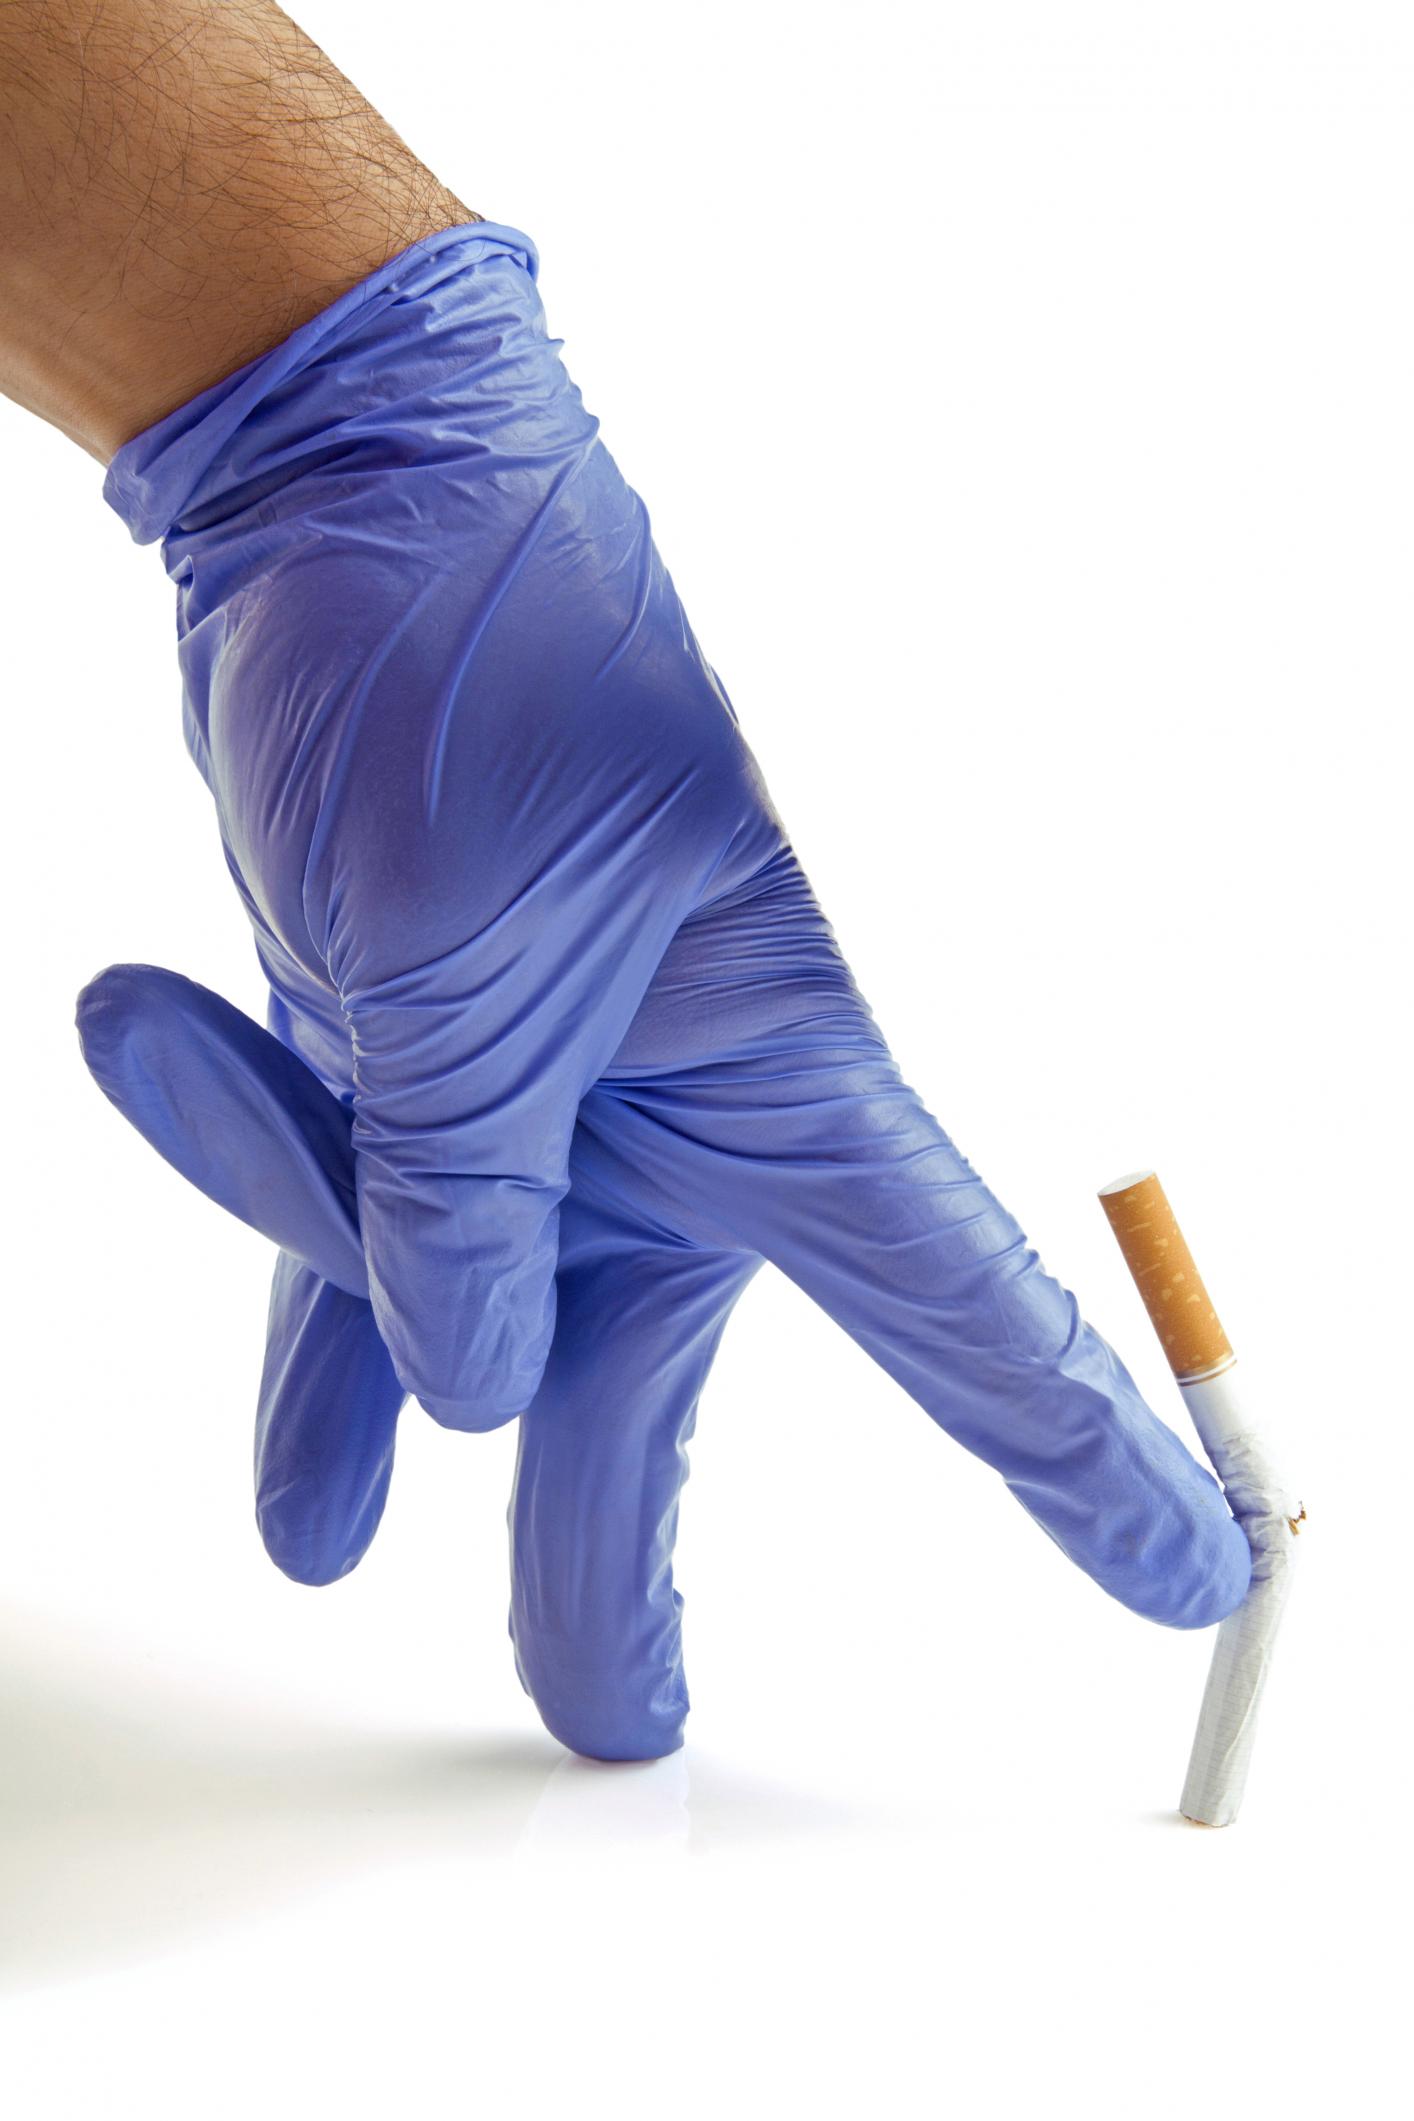 gloved hand throwing cigarette